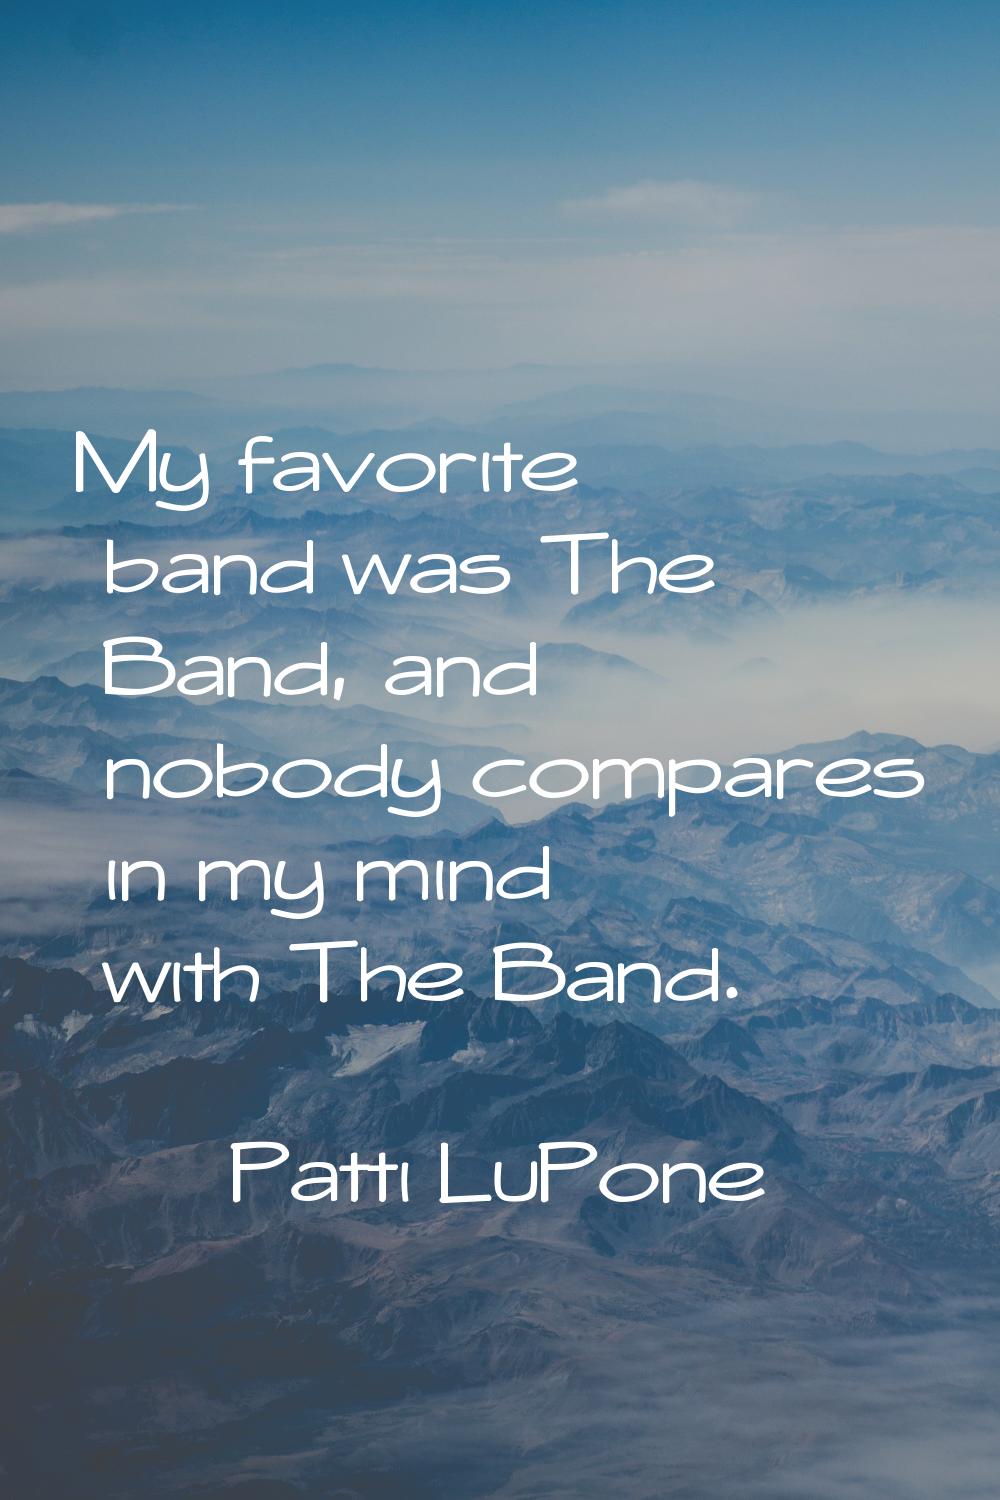 My favorite band was The Band, and nobody compares in my mind with The Band.